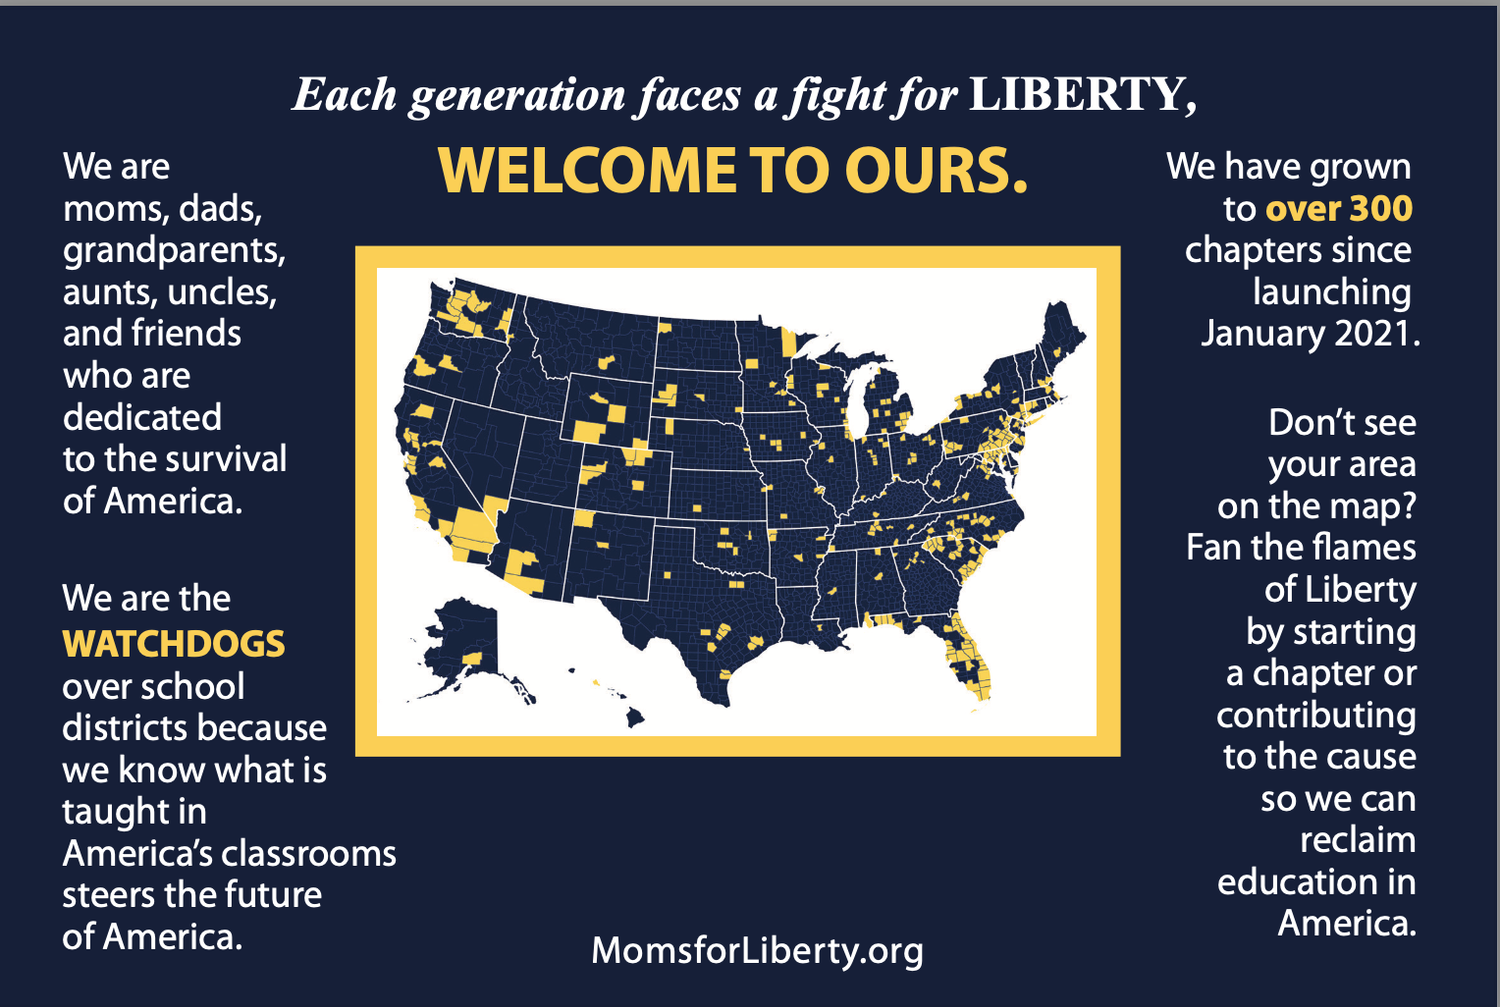 Moms For Liberty Info Cards, Moms For Liberty Info Cards: English Language Info Cards